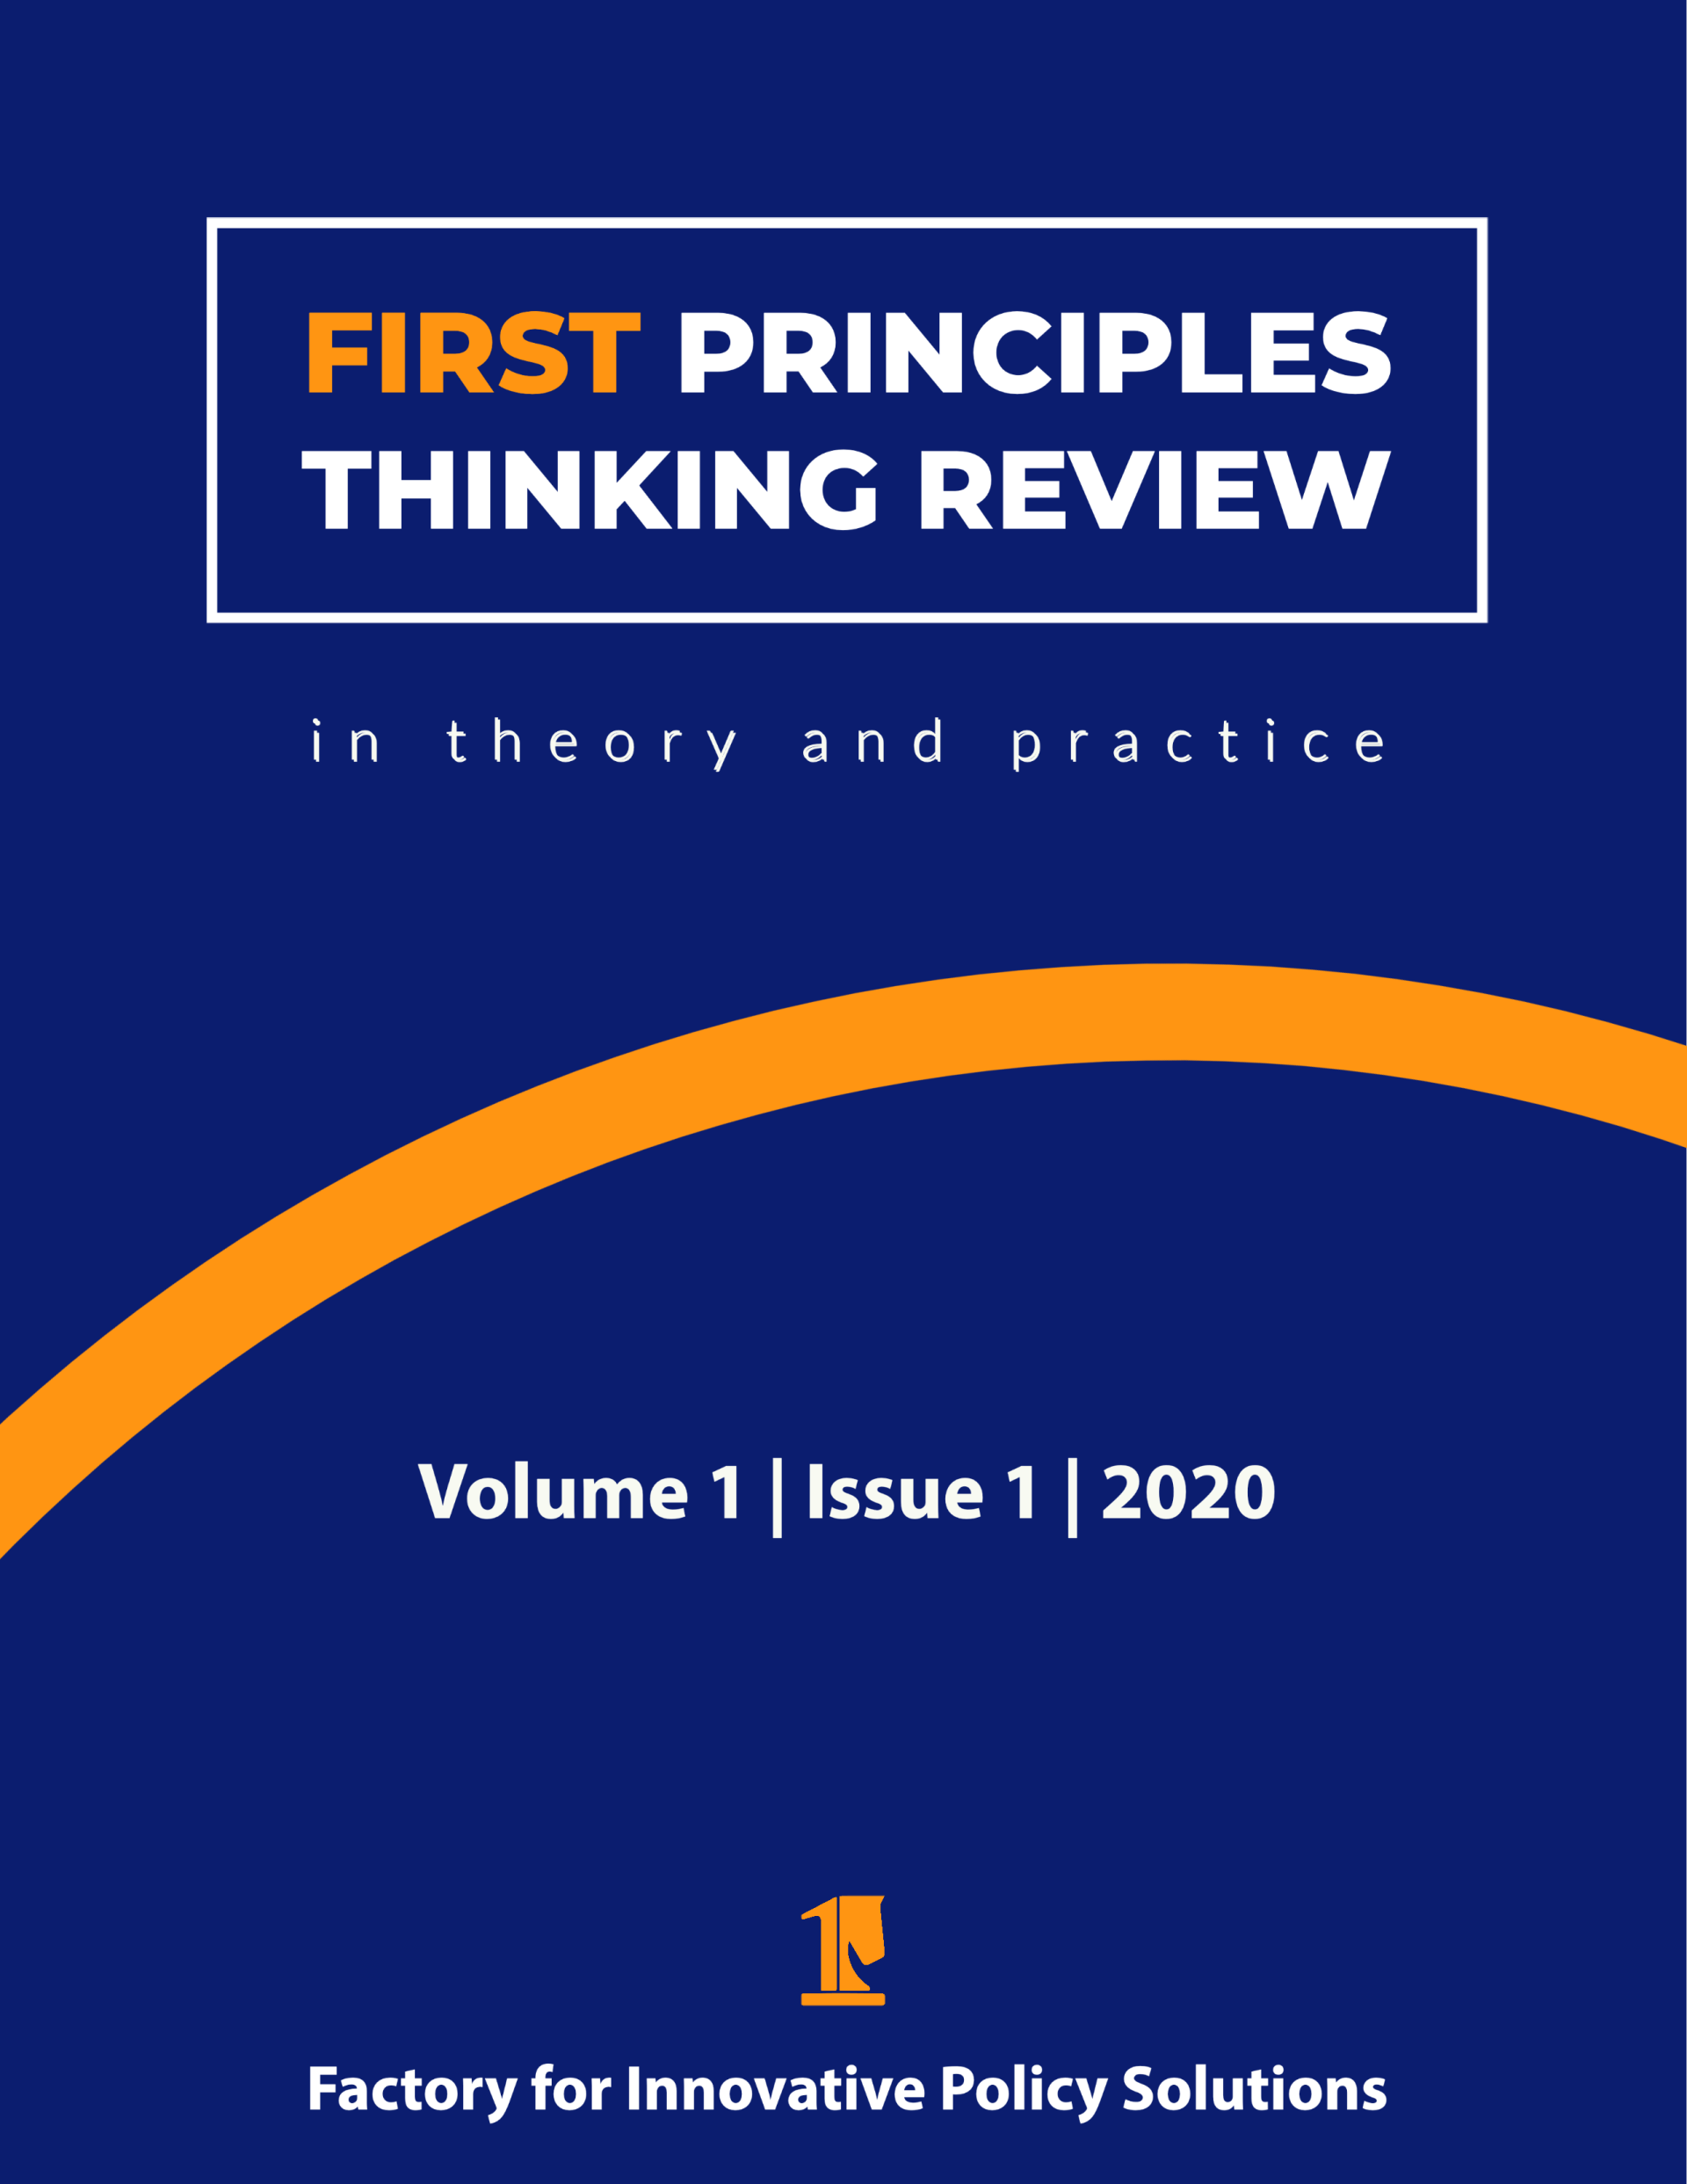 First Principles Thinking Review, Volume 1, Issue 1